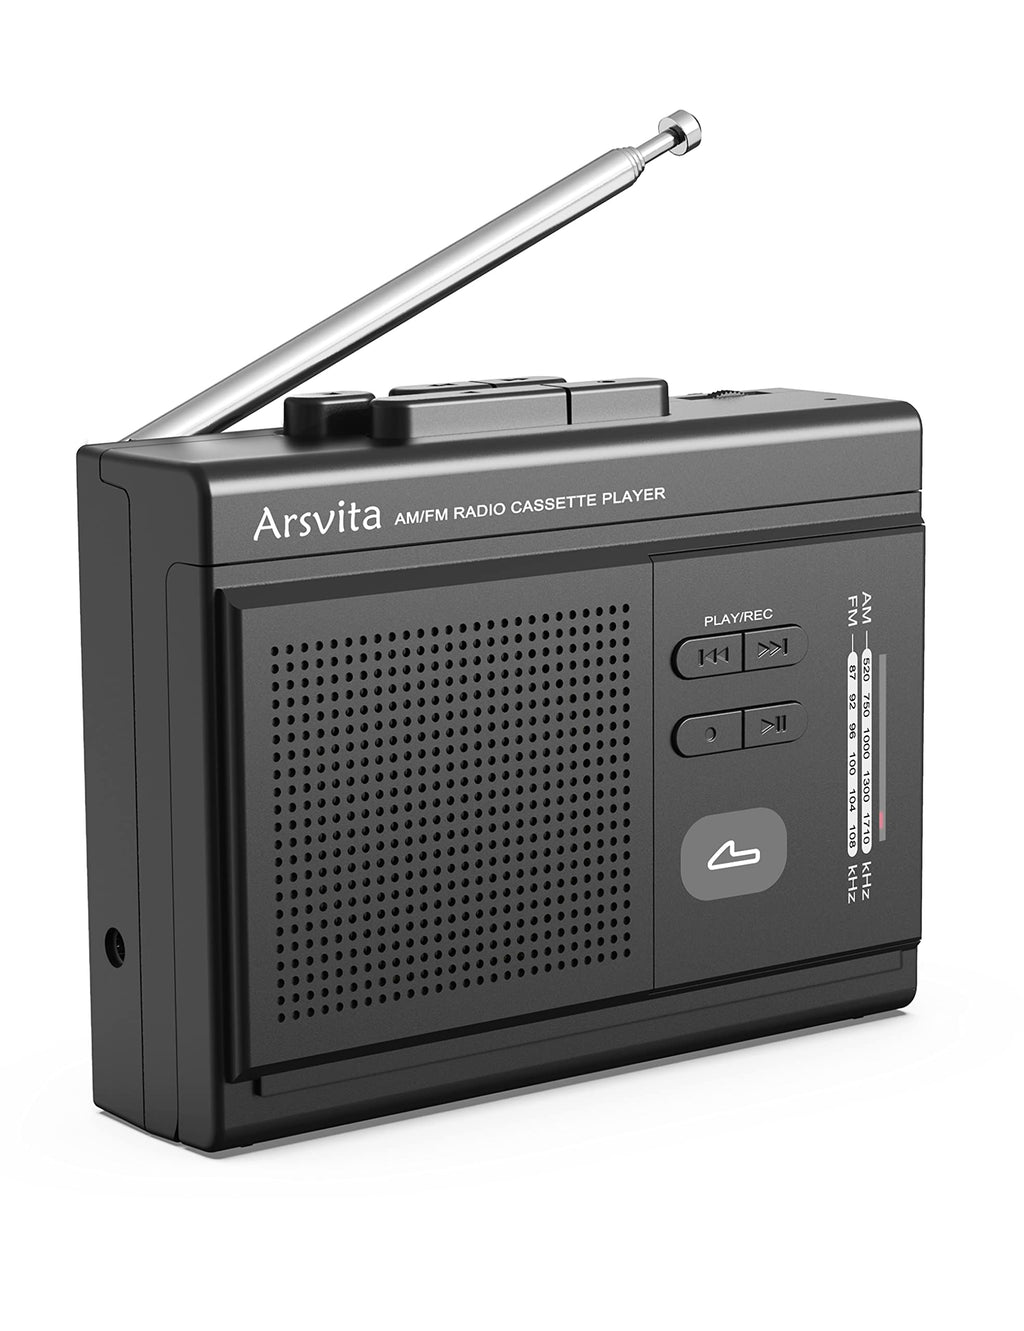  [AUSTRALIA] - Arsvita Portable Cassette Player and Recorder, AM/FM Radio Receiver, Tape to MP3 Converter, Walkman with Speaker and Audio Jack, Support AC and AA Battery, Black